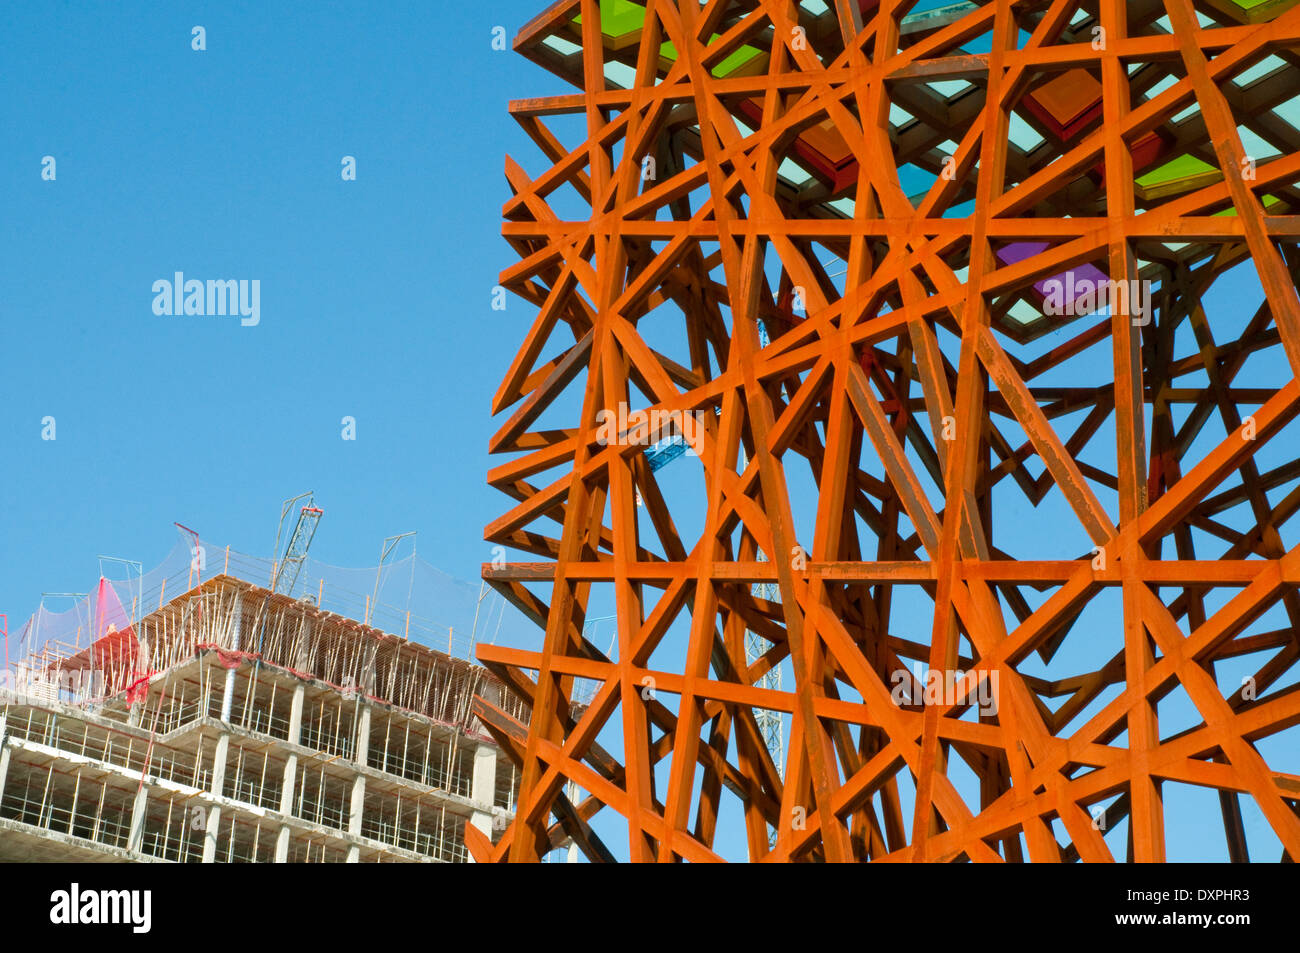 Modern sculpture and buildings under construction, close view. Plaza del Sol, Mostoles, Madrid province, Spain. Stock Photo